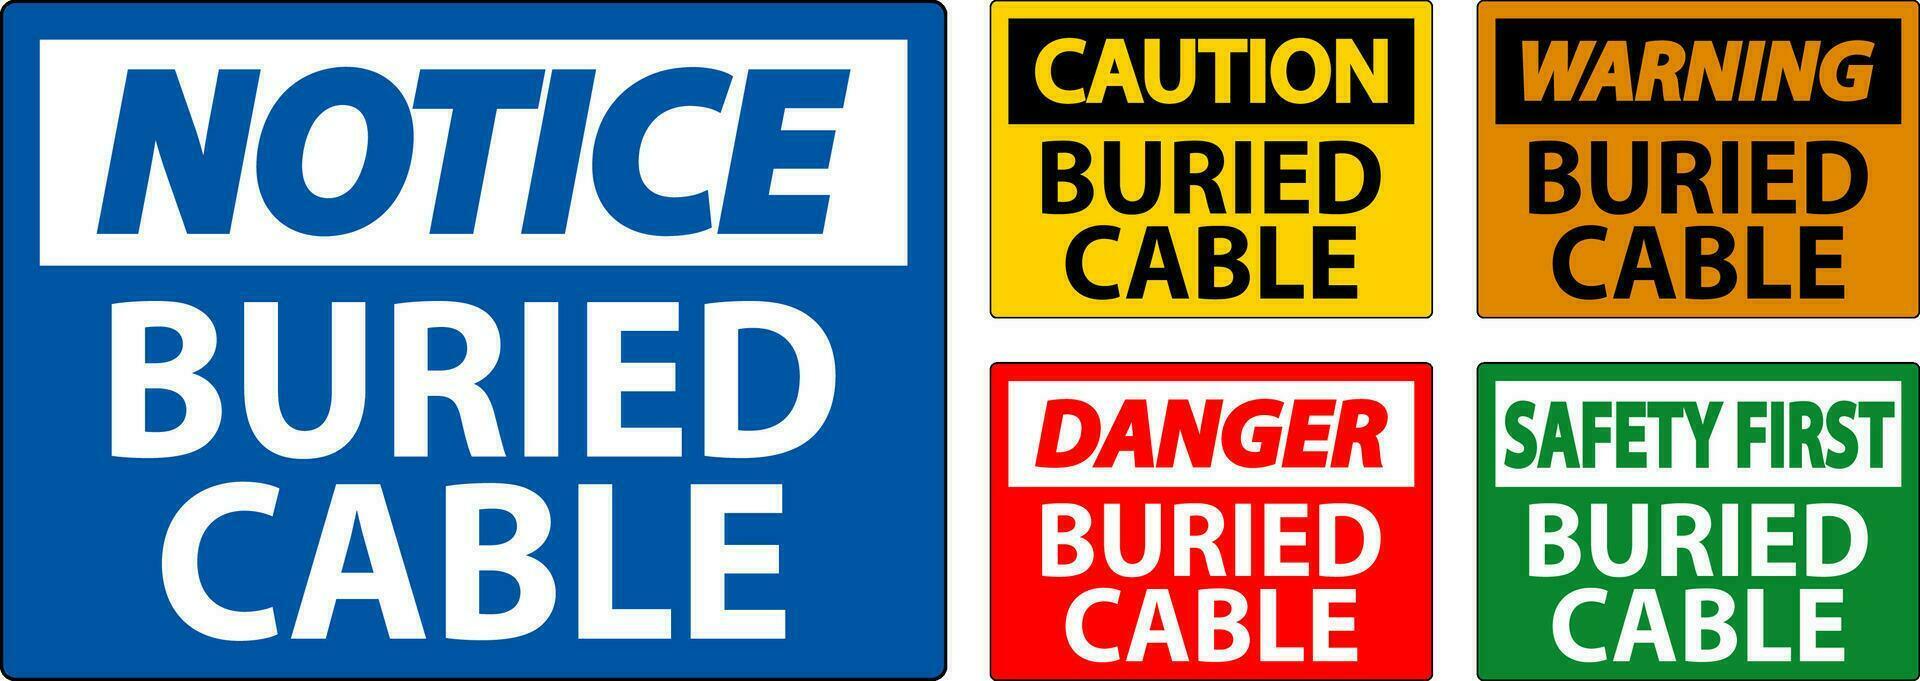 Danger Sign Buried Cable On White Background vector